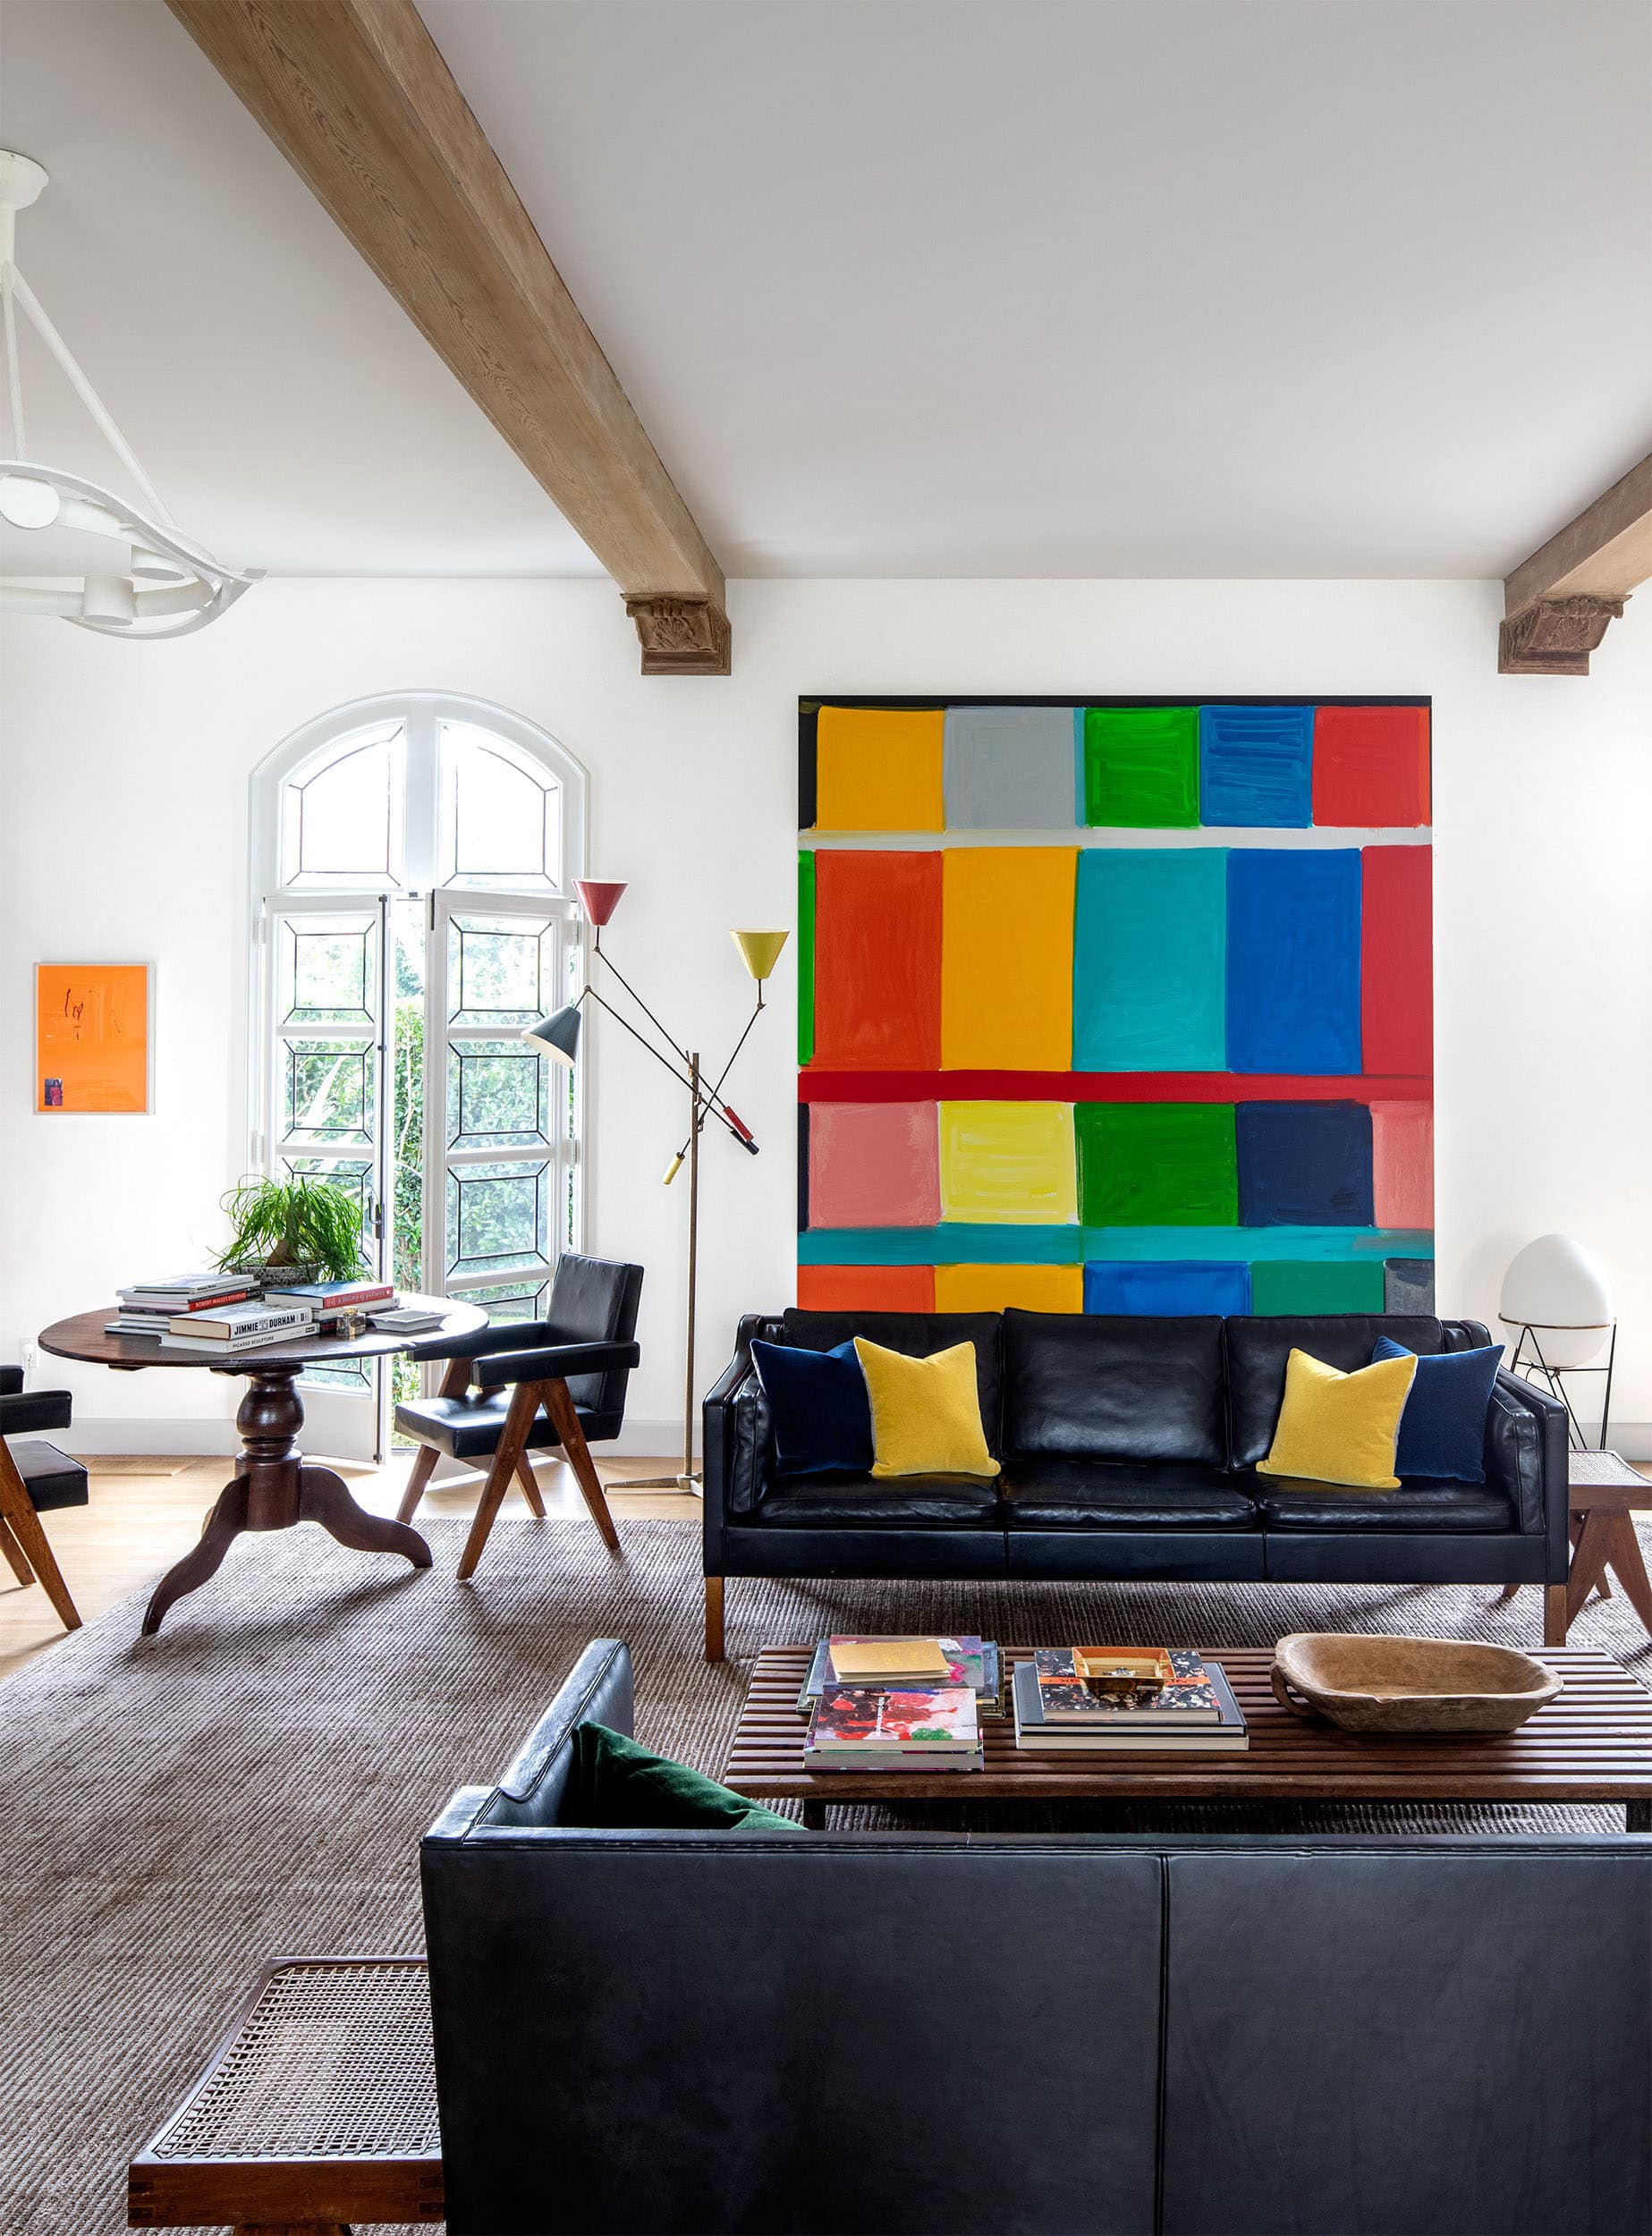 featured image for post: 12 Dramatic Rooms from the 1stDibs 50 Where Art Is the Star of the Show